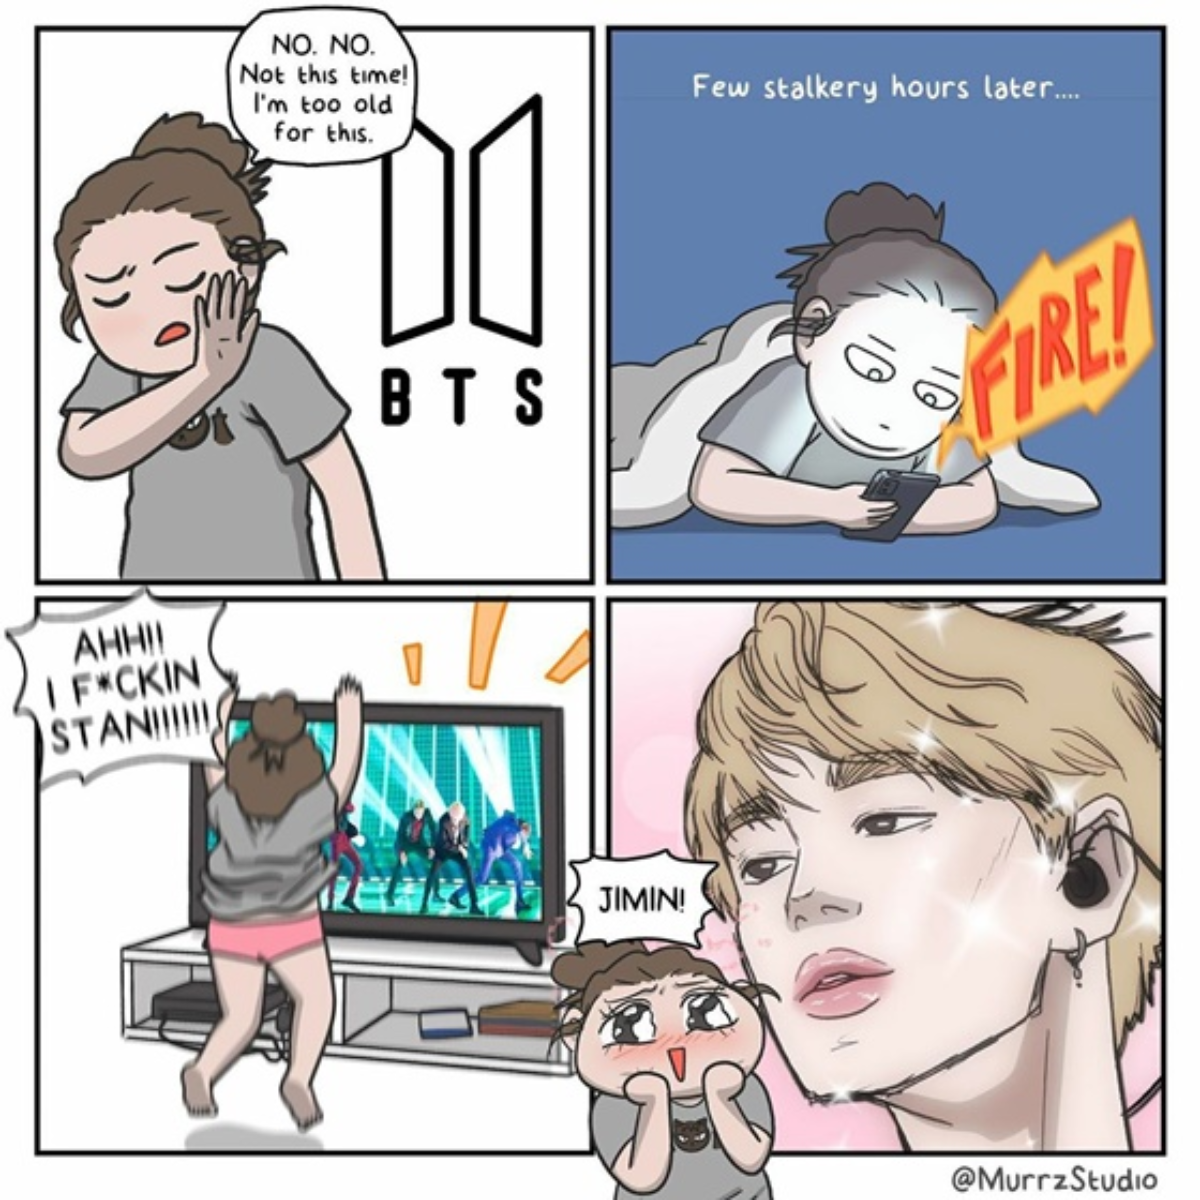 BTS Jimin Appears in a Webtoon by a Popular American Webtoon Writer - Once You Jimin You Can't Jim-out